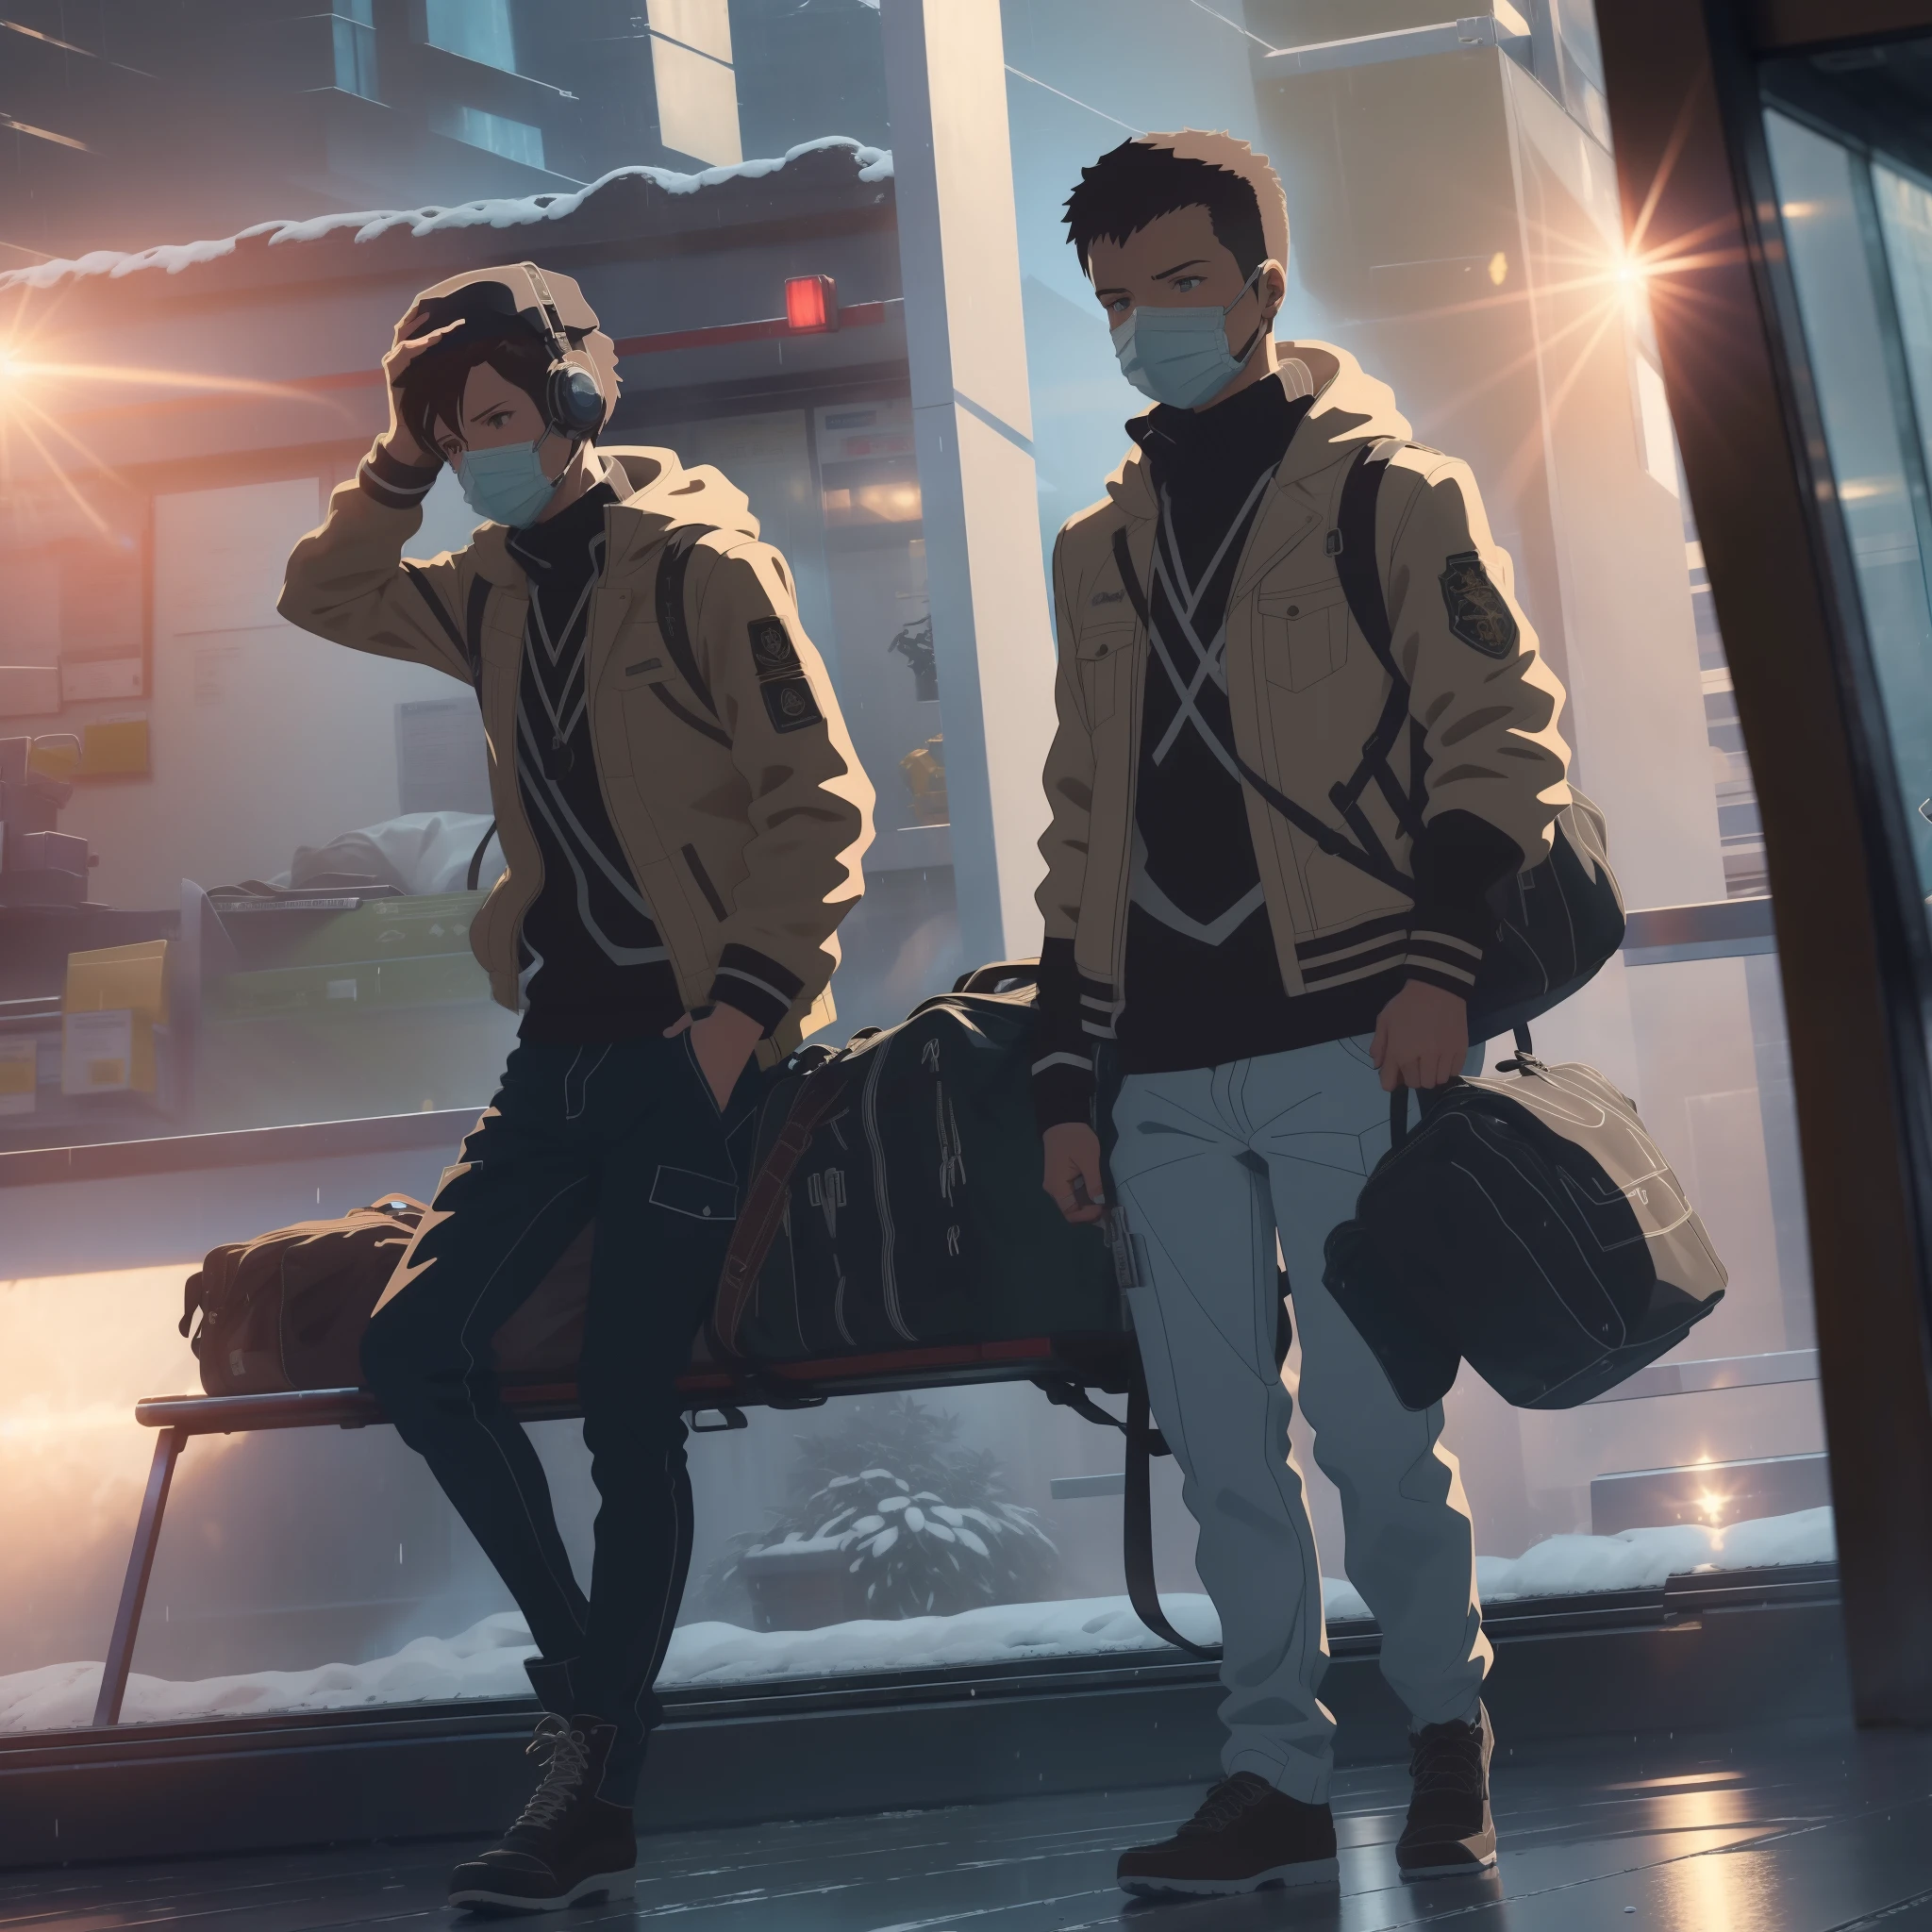 ((High quality)), ((Masterpiece)), 8K, Libido boy,Light rays, Extremely detailed Cg Unity 8K wallpaper, Game CG, view the viewer, mitts, Boots, full bodyesbian, Watch, Computer, Mask, UAVs, holding weapon, Earphone, Jacket, bag, Backpack,urban backdrop，Makoto Shinkai anime style，The most perfect work of art in the world，